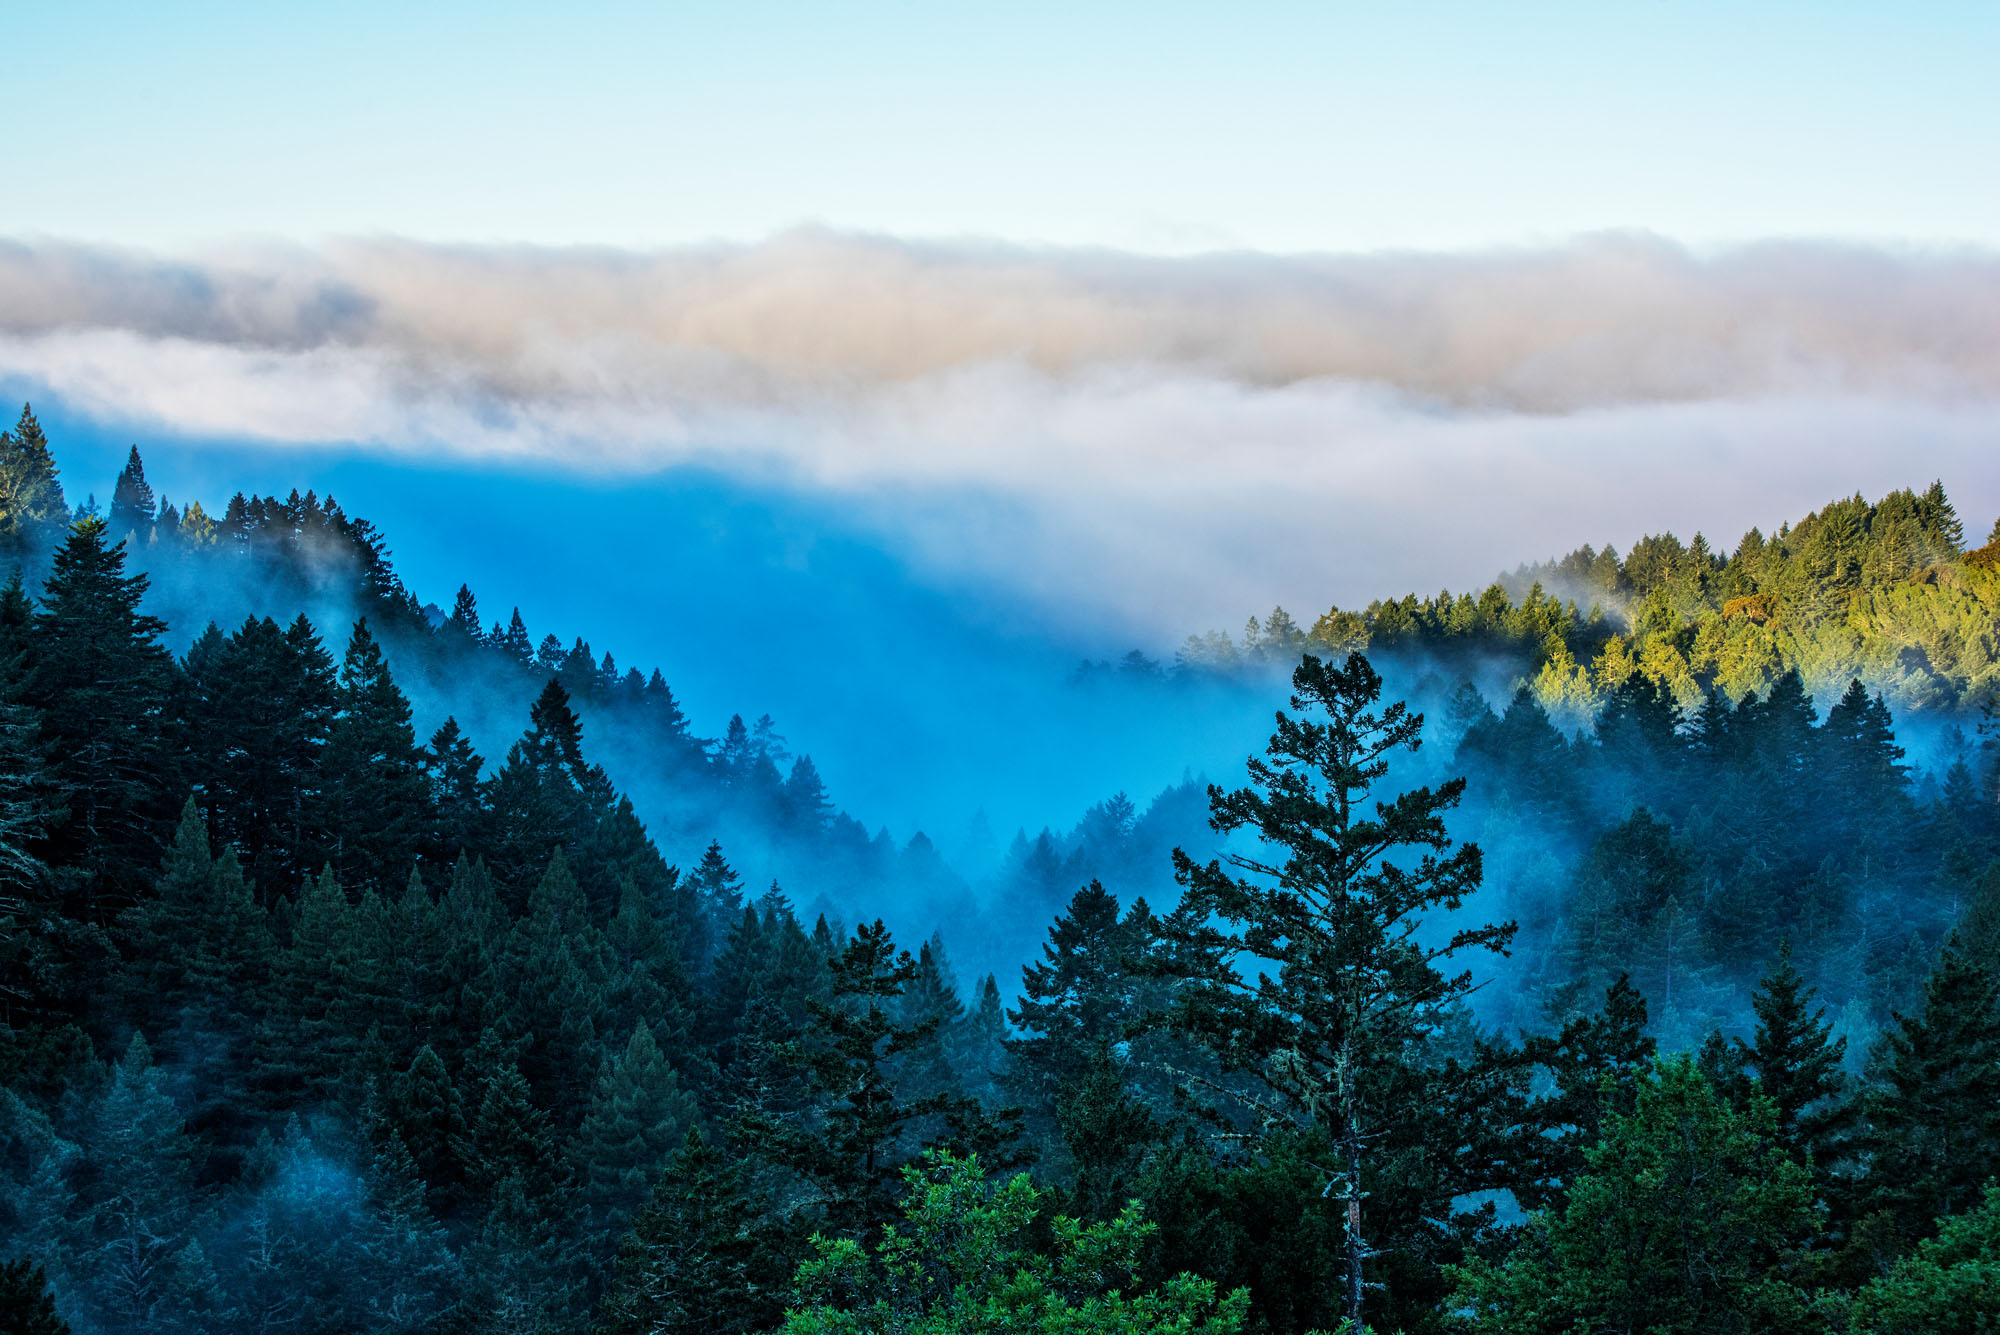 Mountain forest shrouded in fog with blue skies and sun above the fog